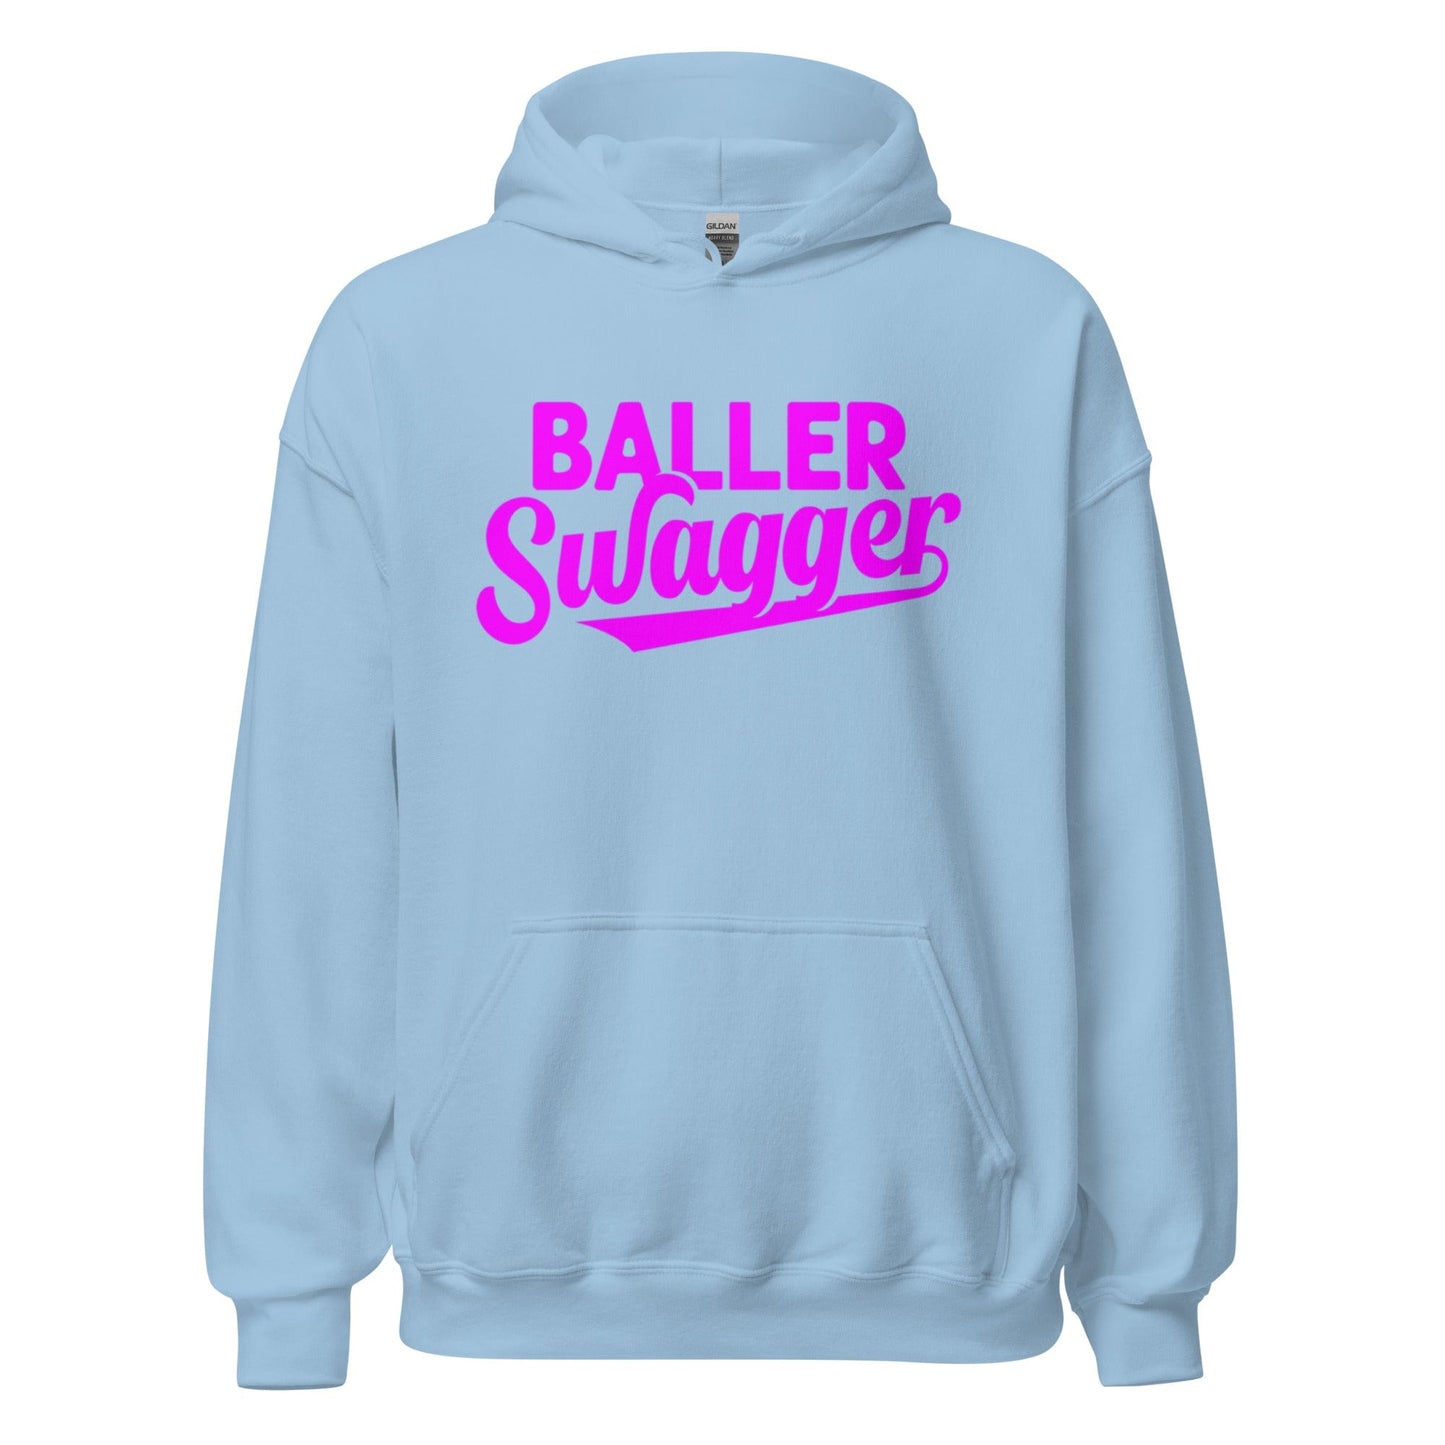 Baller Swagger Pink - Adult Hoodie